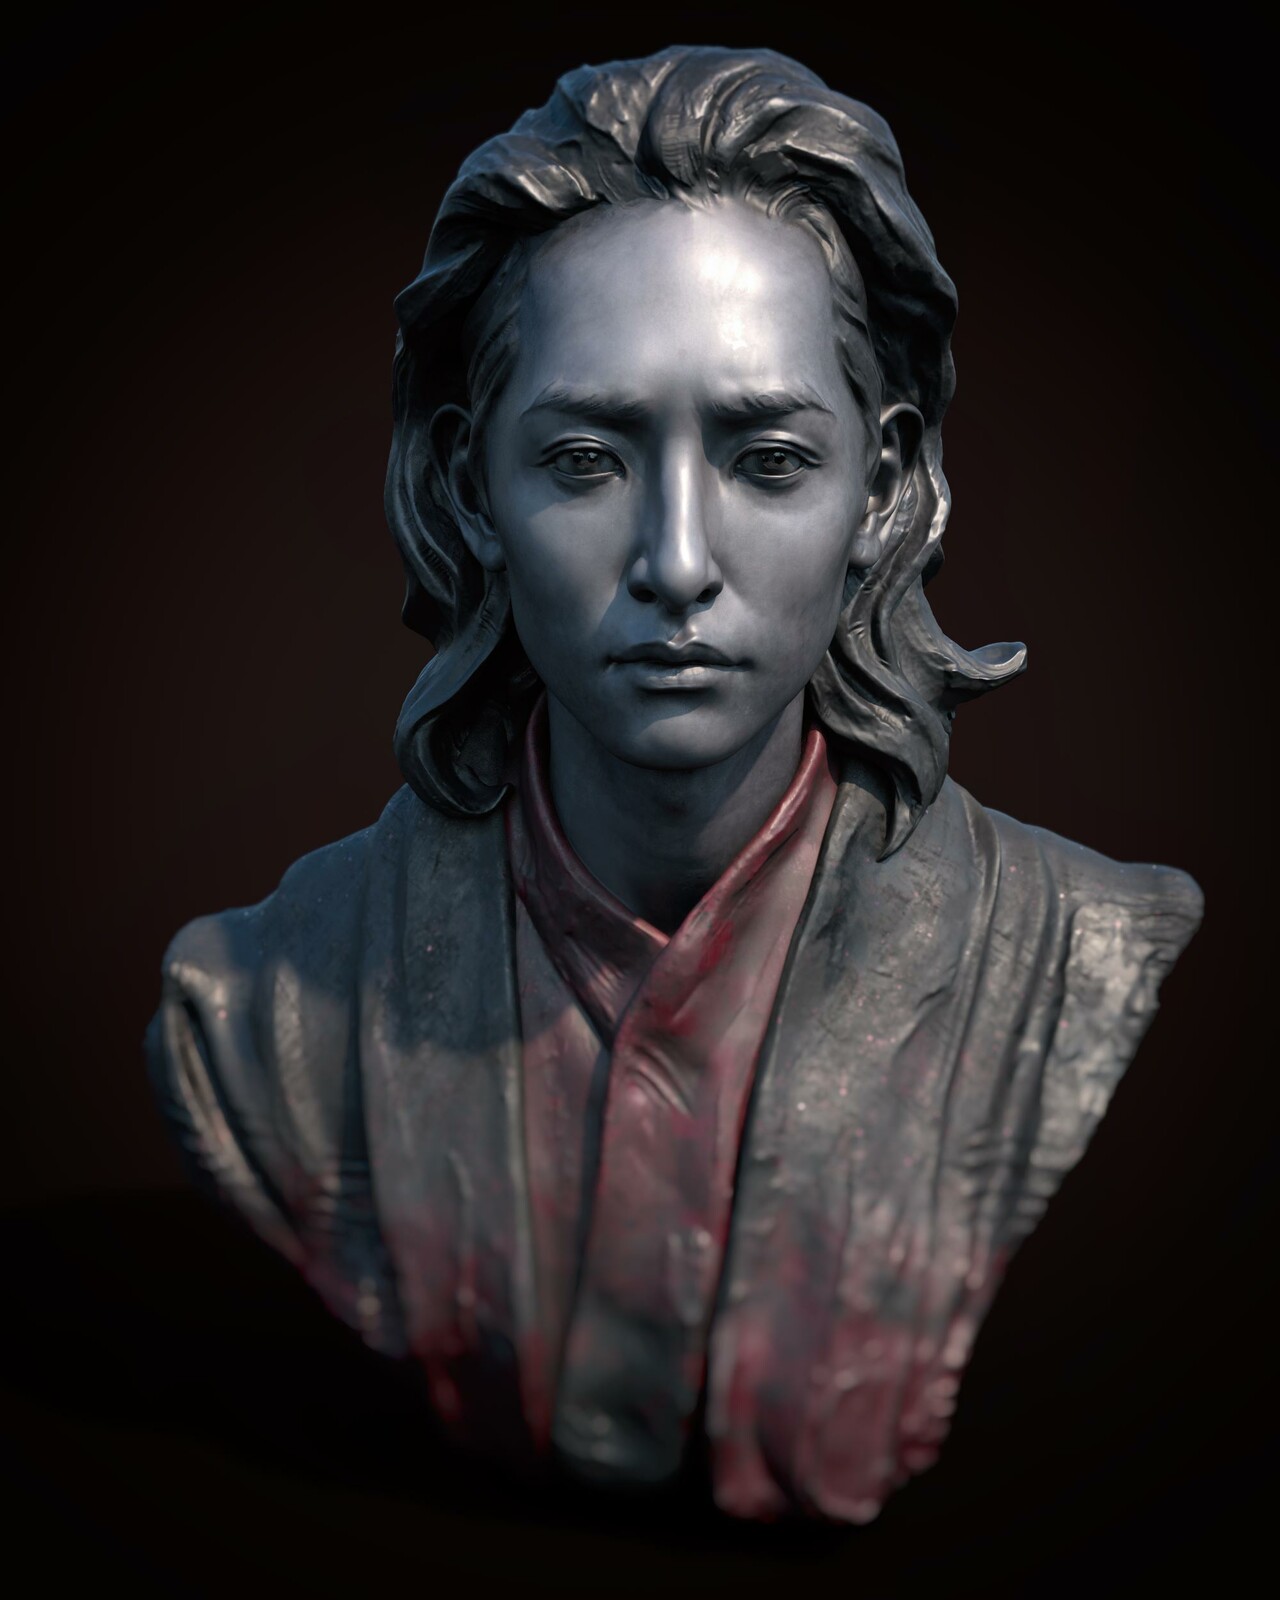 Gwi - this is a study based on Gwi the Vampire portrayed by 이수혁 in a Korean Drama 'The Scholar Who Walks the Night'. Color done in Substance Painter